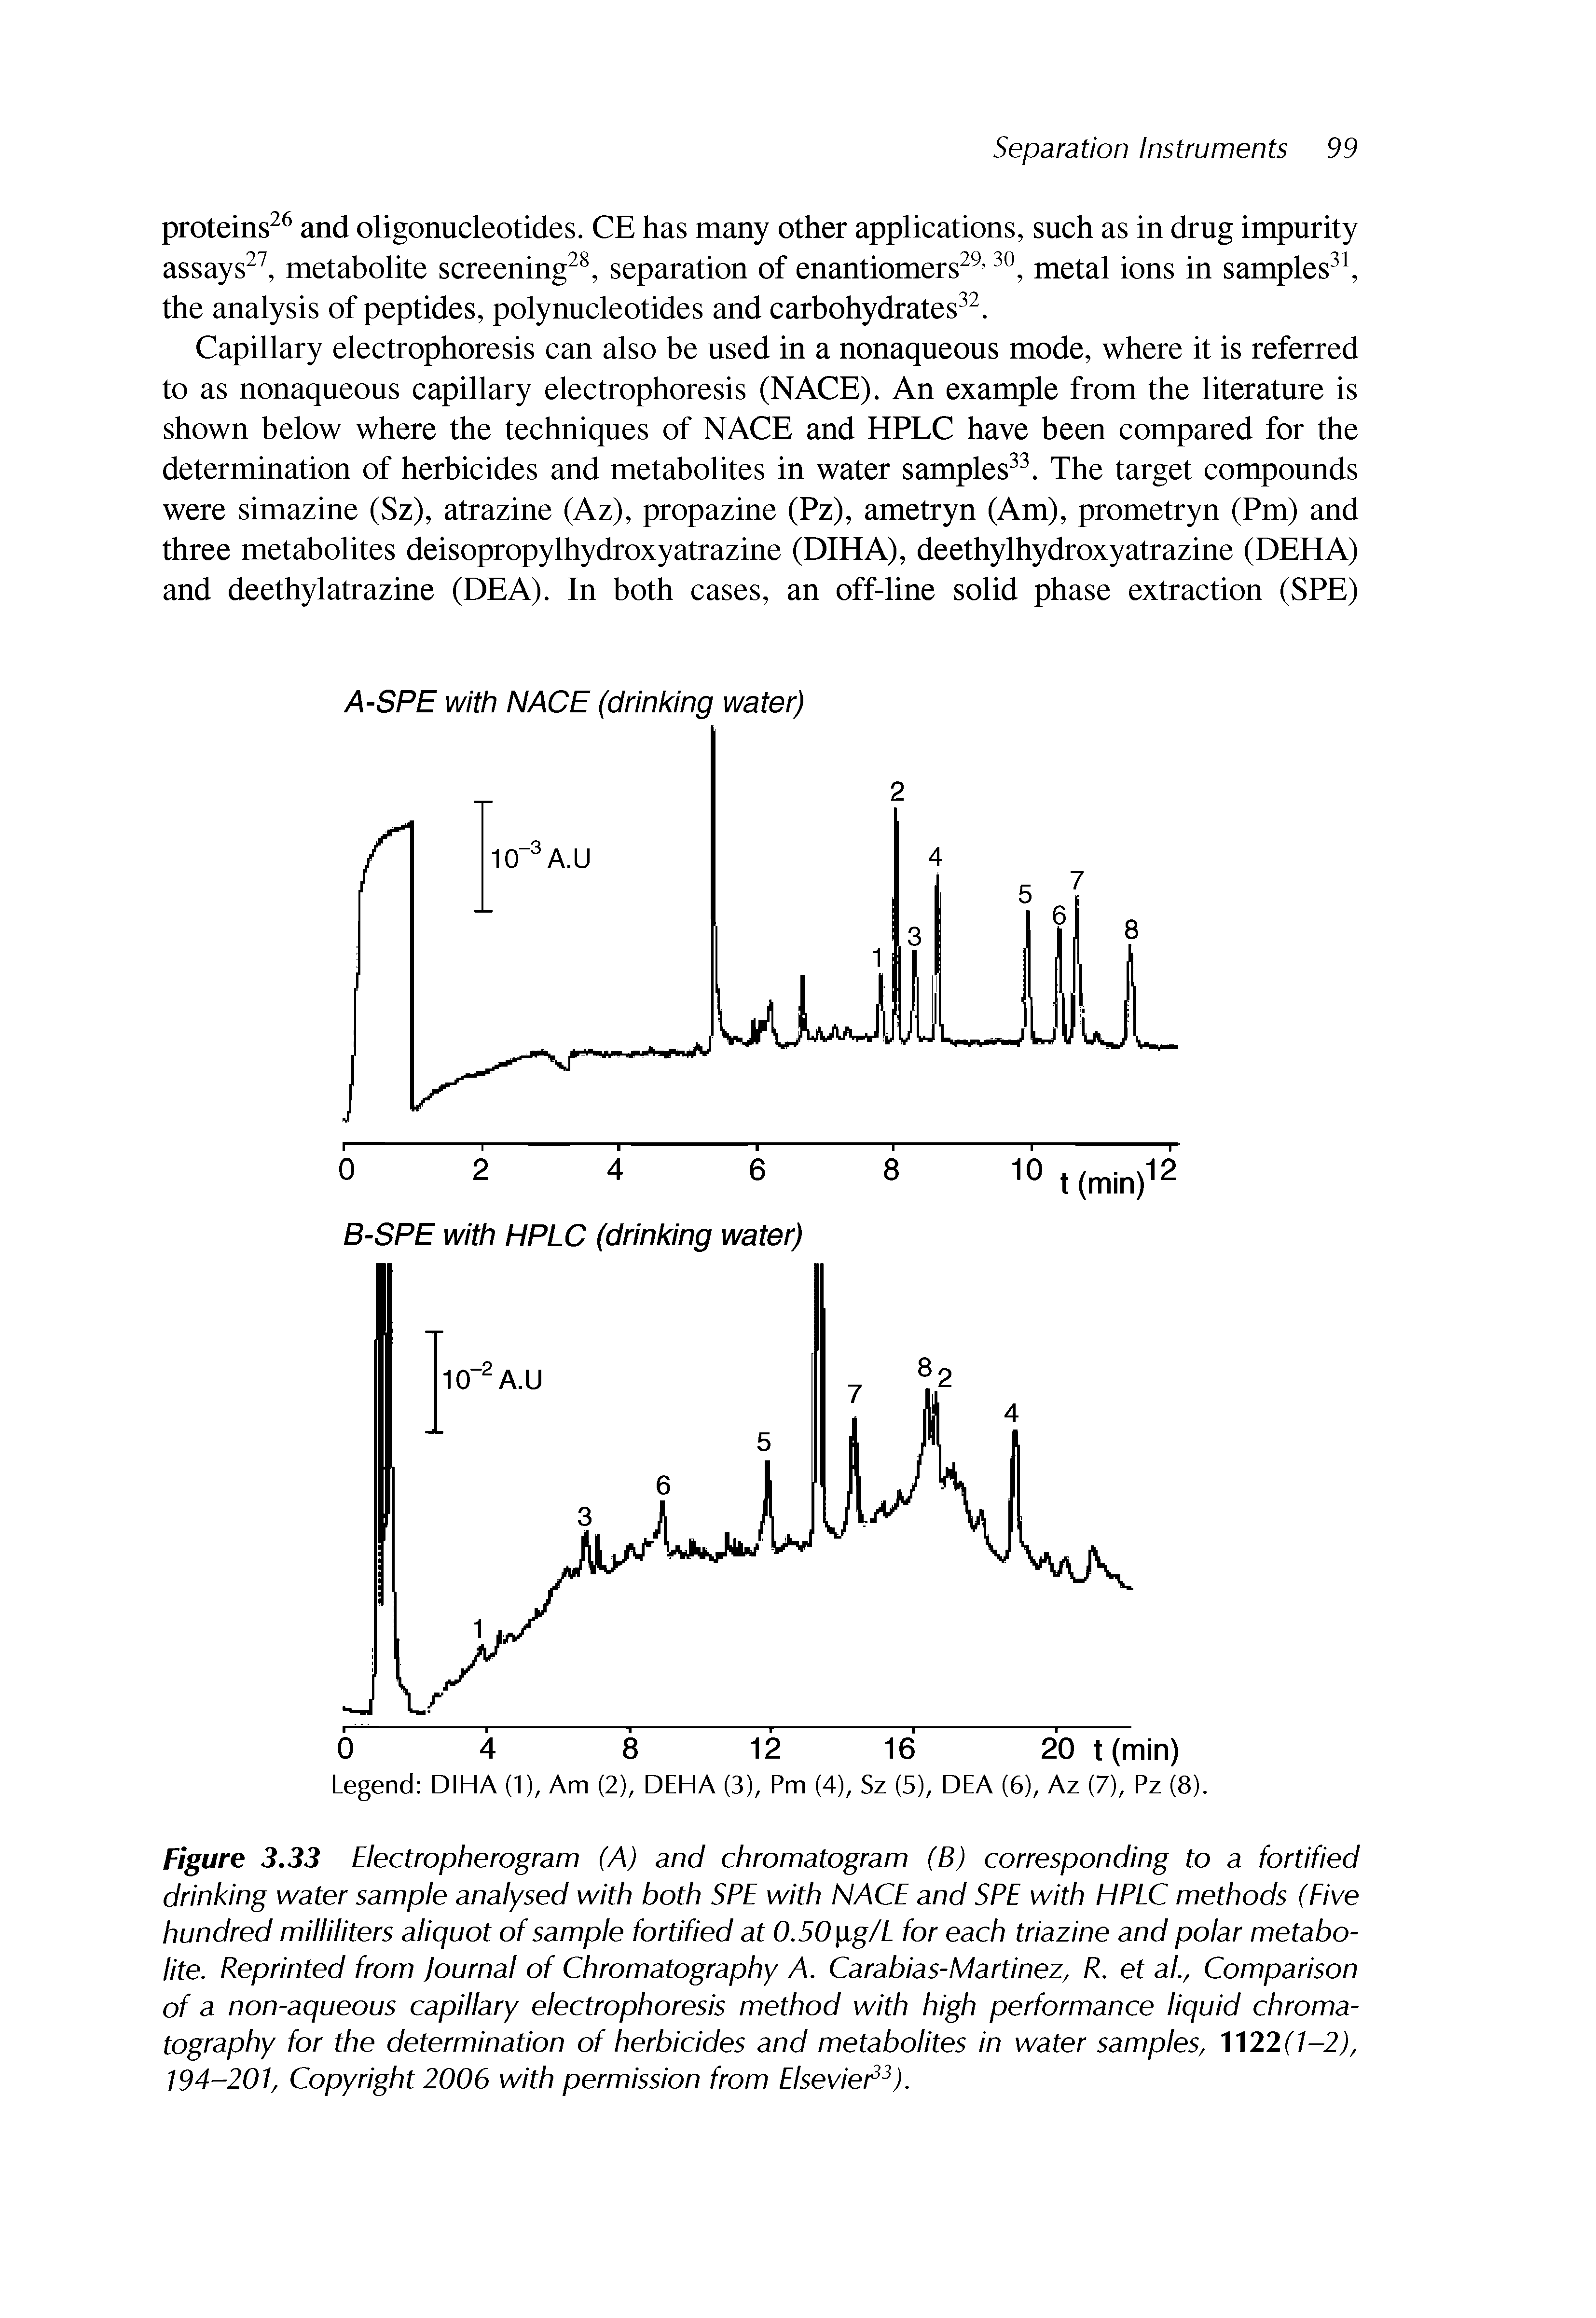 Figure 3.33 Electropherogram (A) and chromatogram (B) corresponding to a fortified drinking water sample analysed with both SPE with NACE and SPE with HPLC methods (Eive hundred milliliters aliquot of sample fortified at 0.50 ig/L for each triazine and polar metabolite. Reprinted from Journal of Chromatography A. Carabias-Martinez, R, et ai, Comparison of a non-aqueous capillary electrophoresis method with high performance liquid chromatography for the determination of herbicides and metabolites in water samples, 22(l-2), 194-201, Copyright 2006 with permission from Eisevied ).